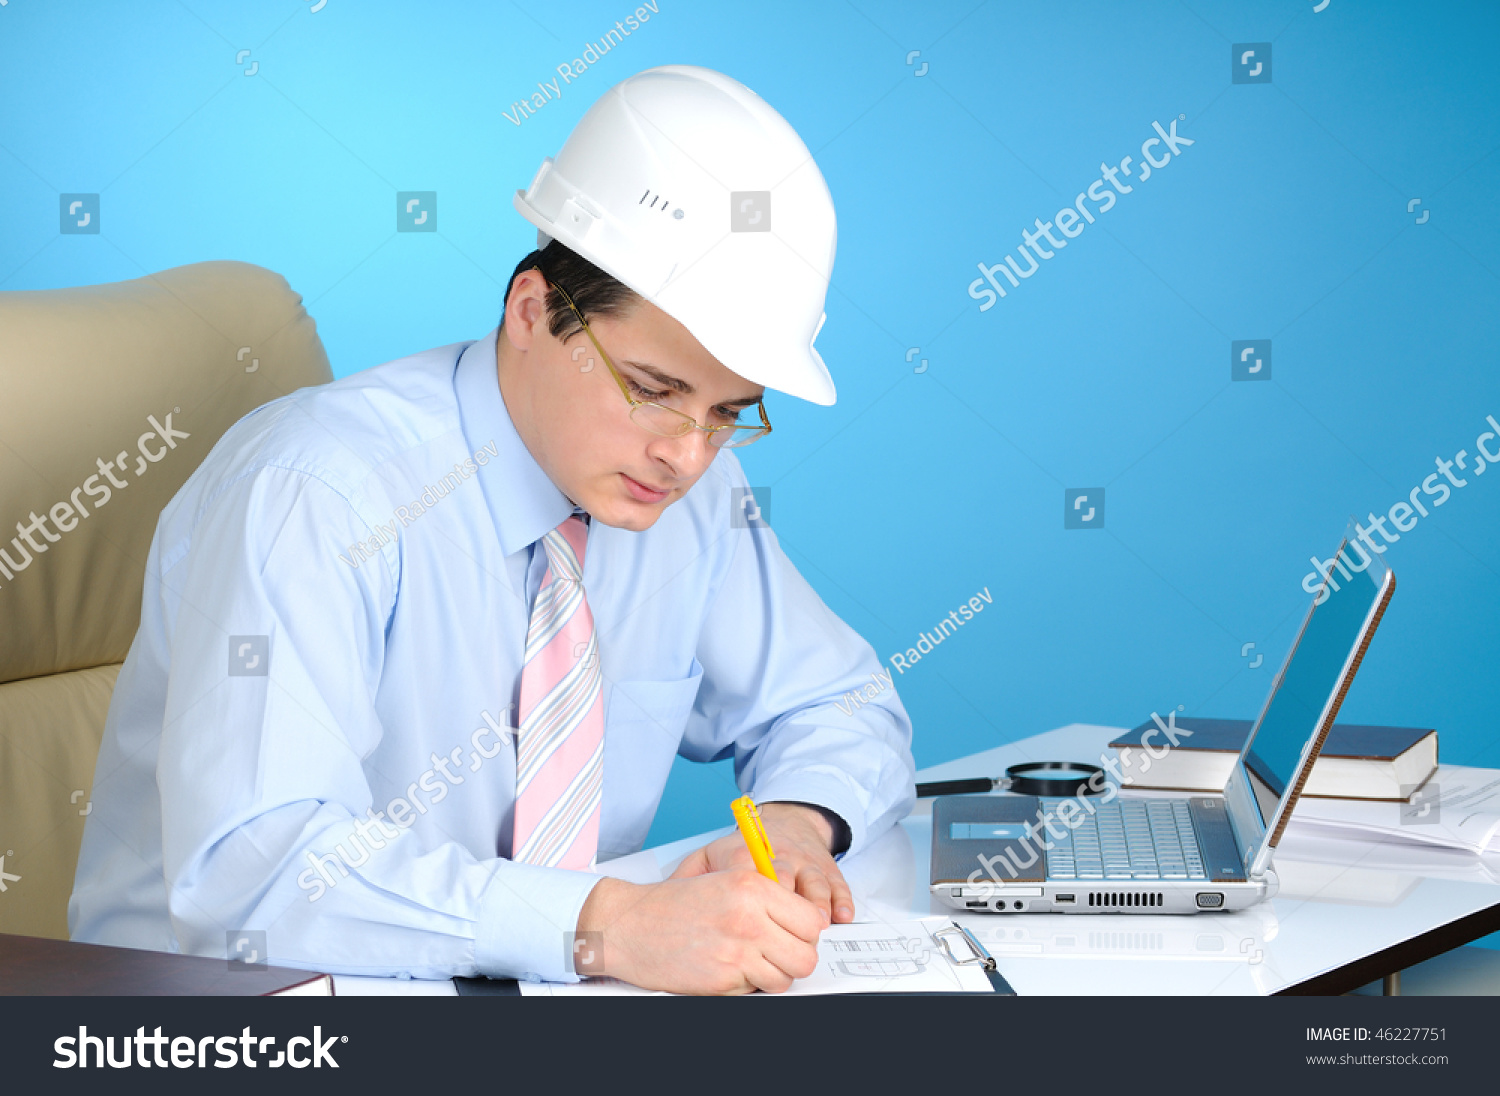 An engineer with white hard hat at work  on blue background #46227751